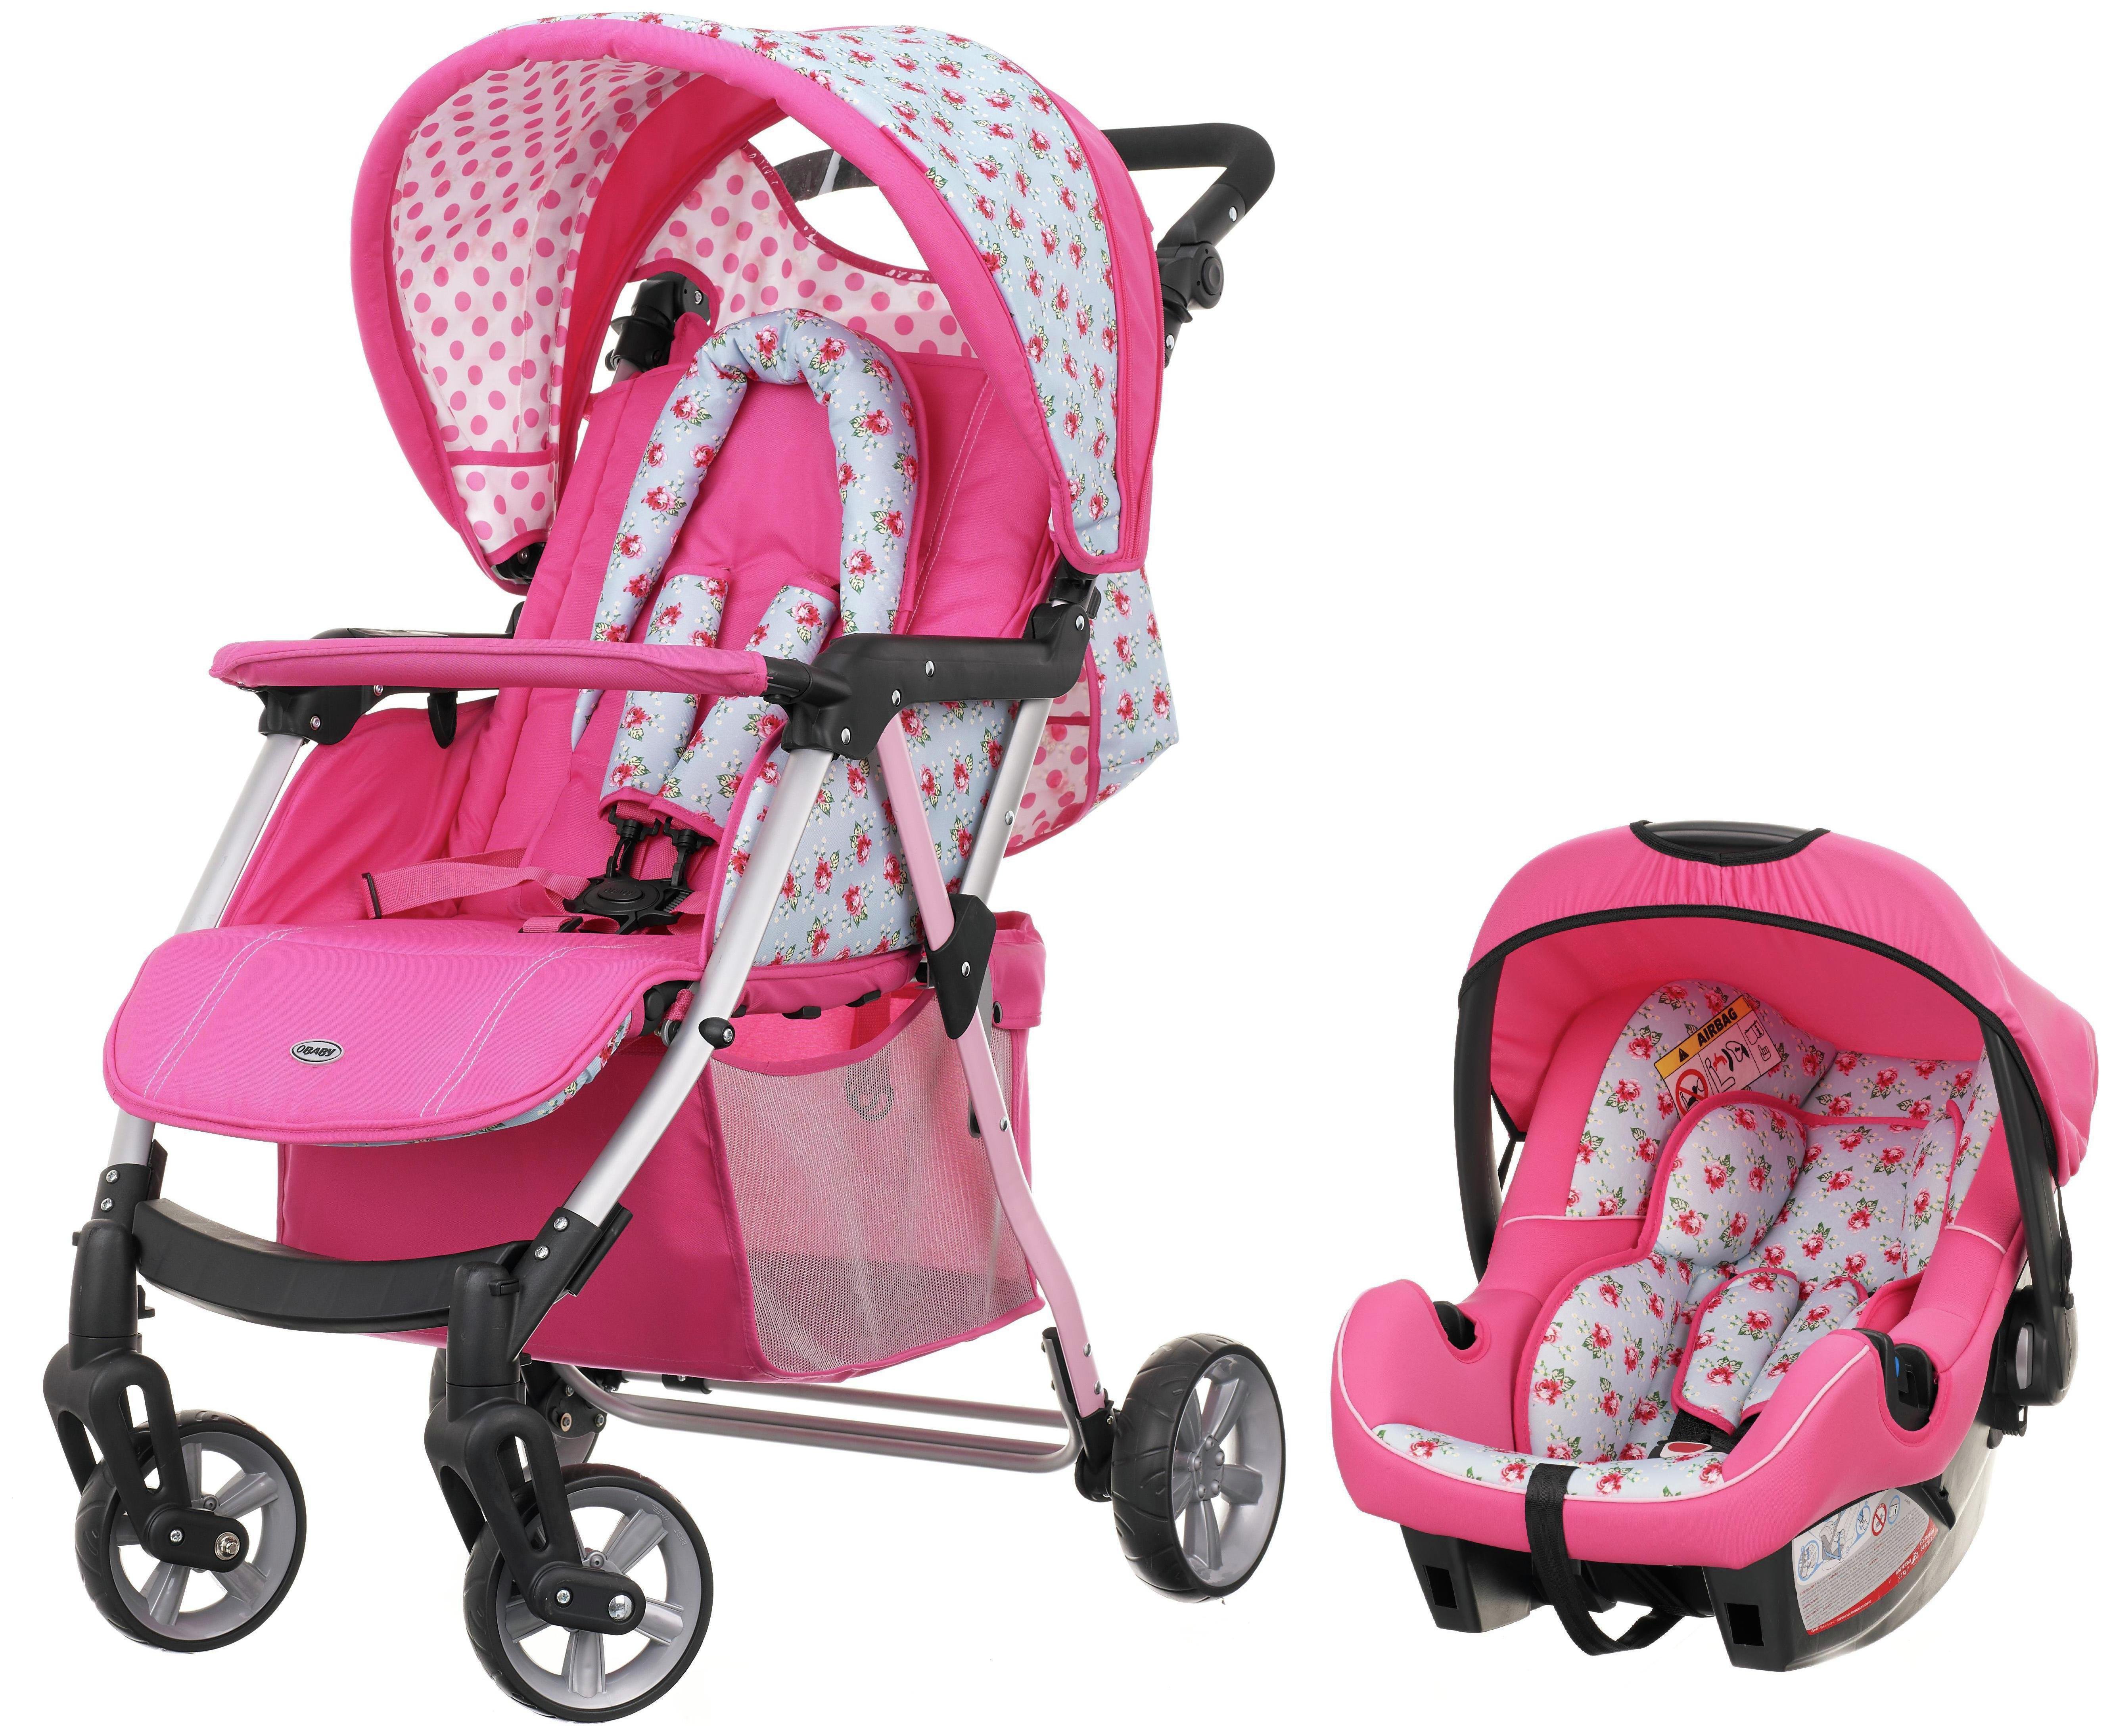 Obaby Hera Travel System - Cottage Rose Review